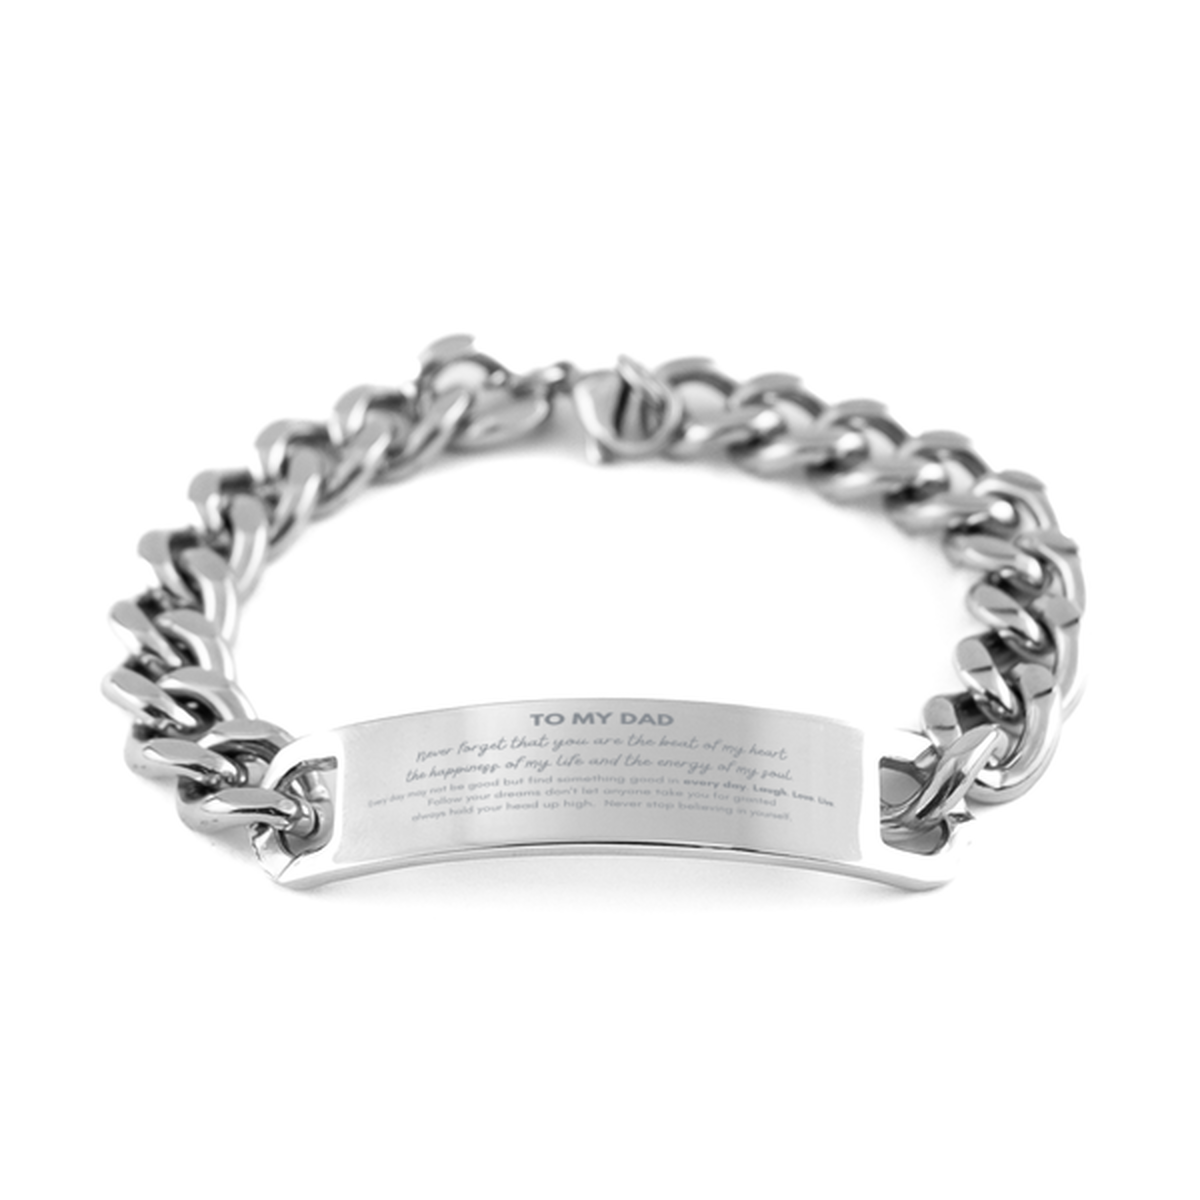 To My Dad Bracelet Gifts, Christmas Dad Cuban Chain Stainless Steel Bracelet Present, Birthday Unique Motivational For Dad, To My Dad Never forget that you are the beat of my heart the happiness of my life and the energy of my soul